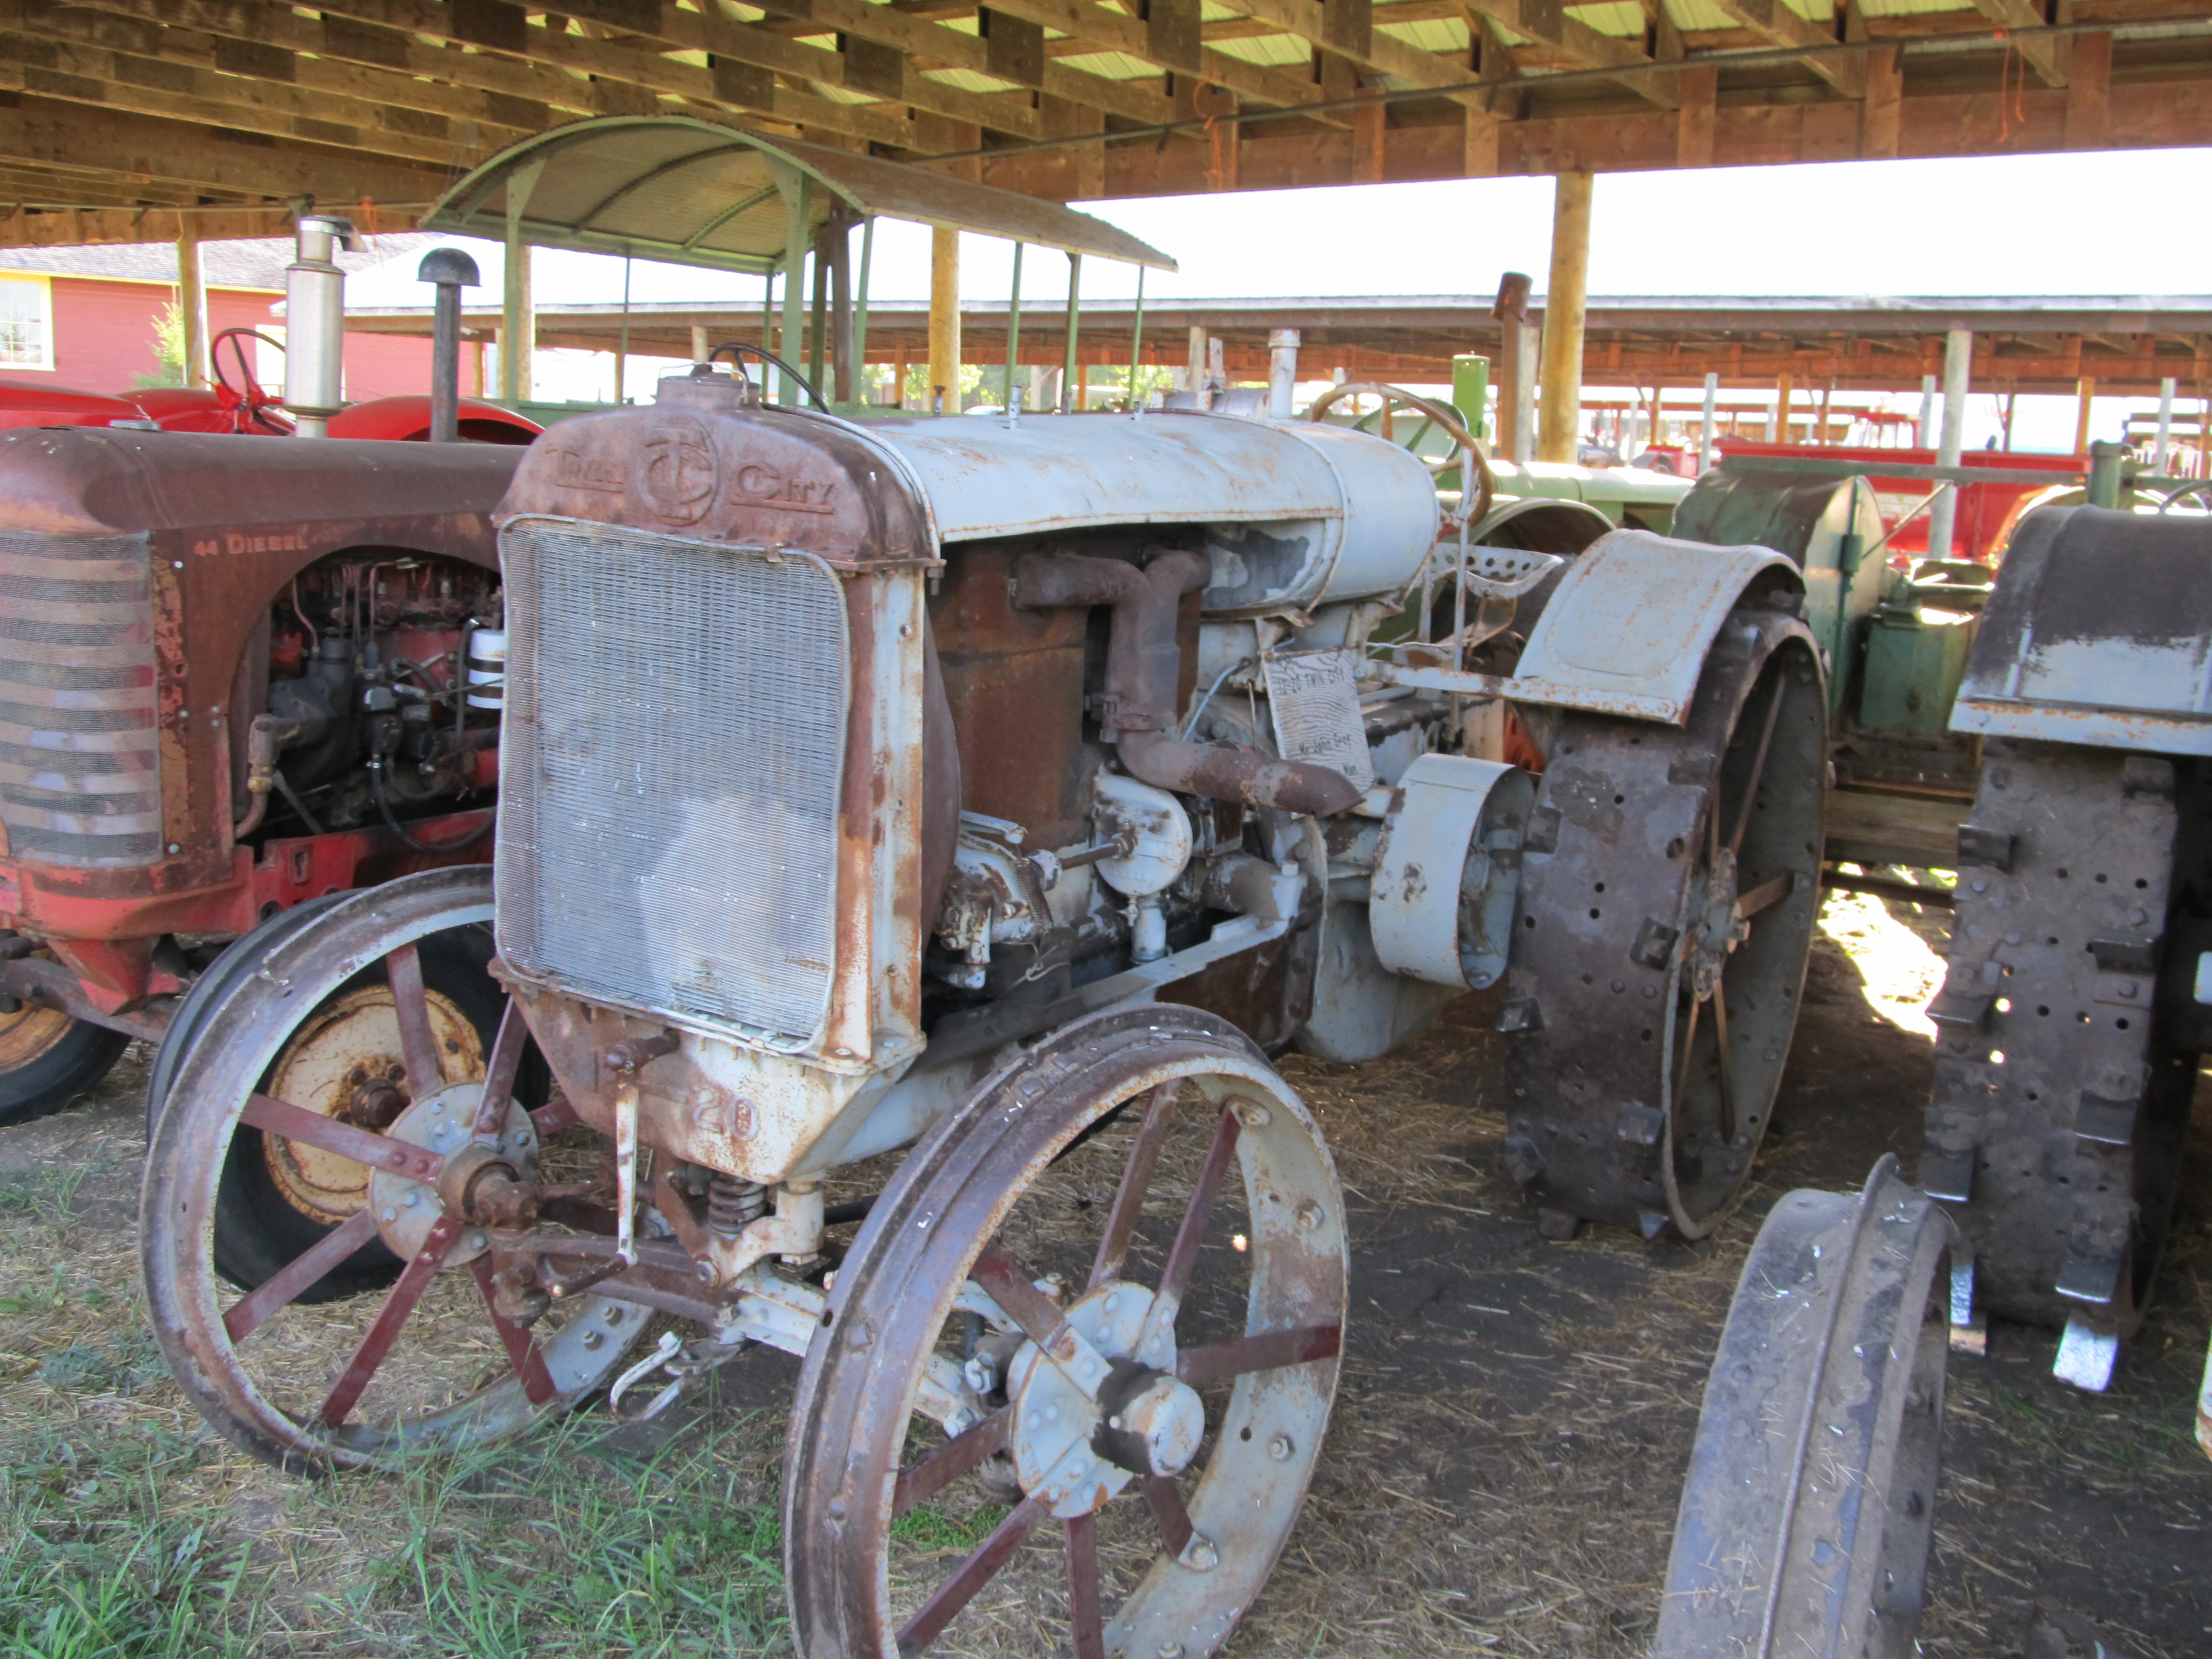 Twin City 12-20 (1920) - Manitoba Agricultural Museum